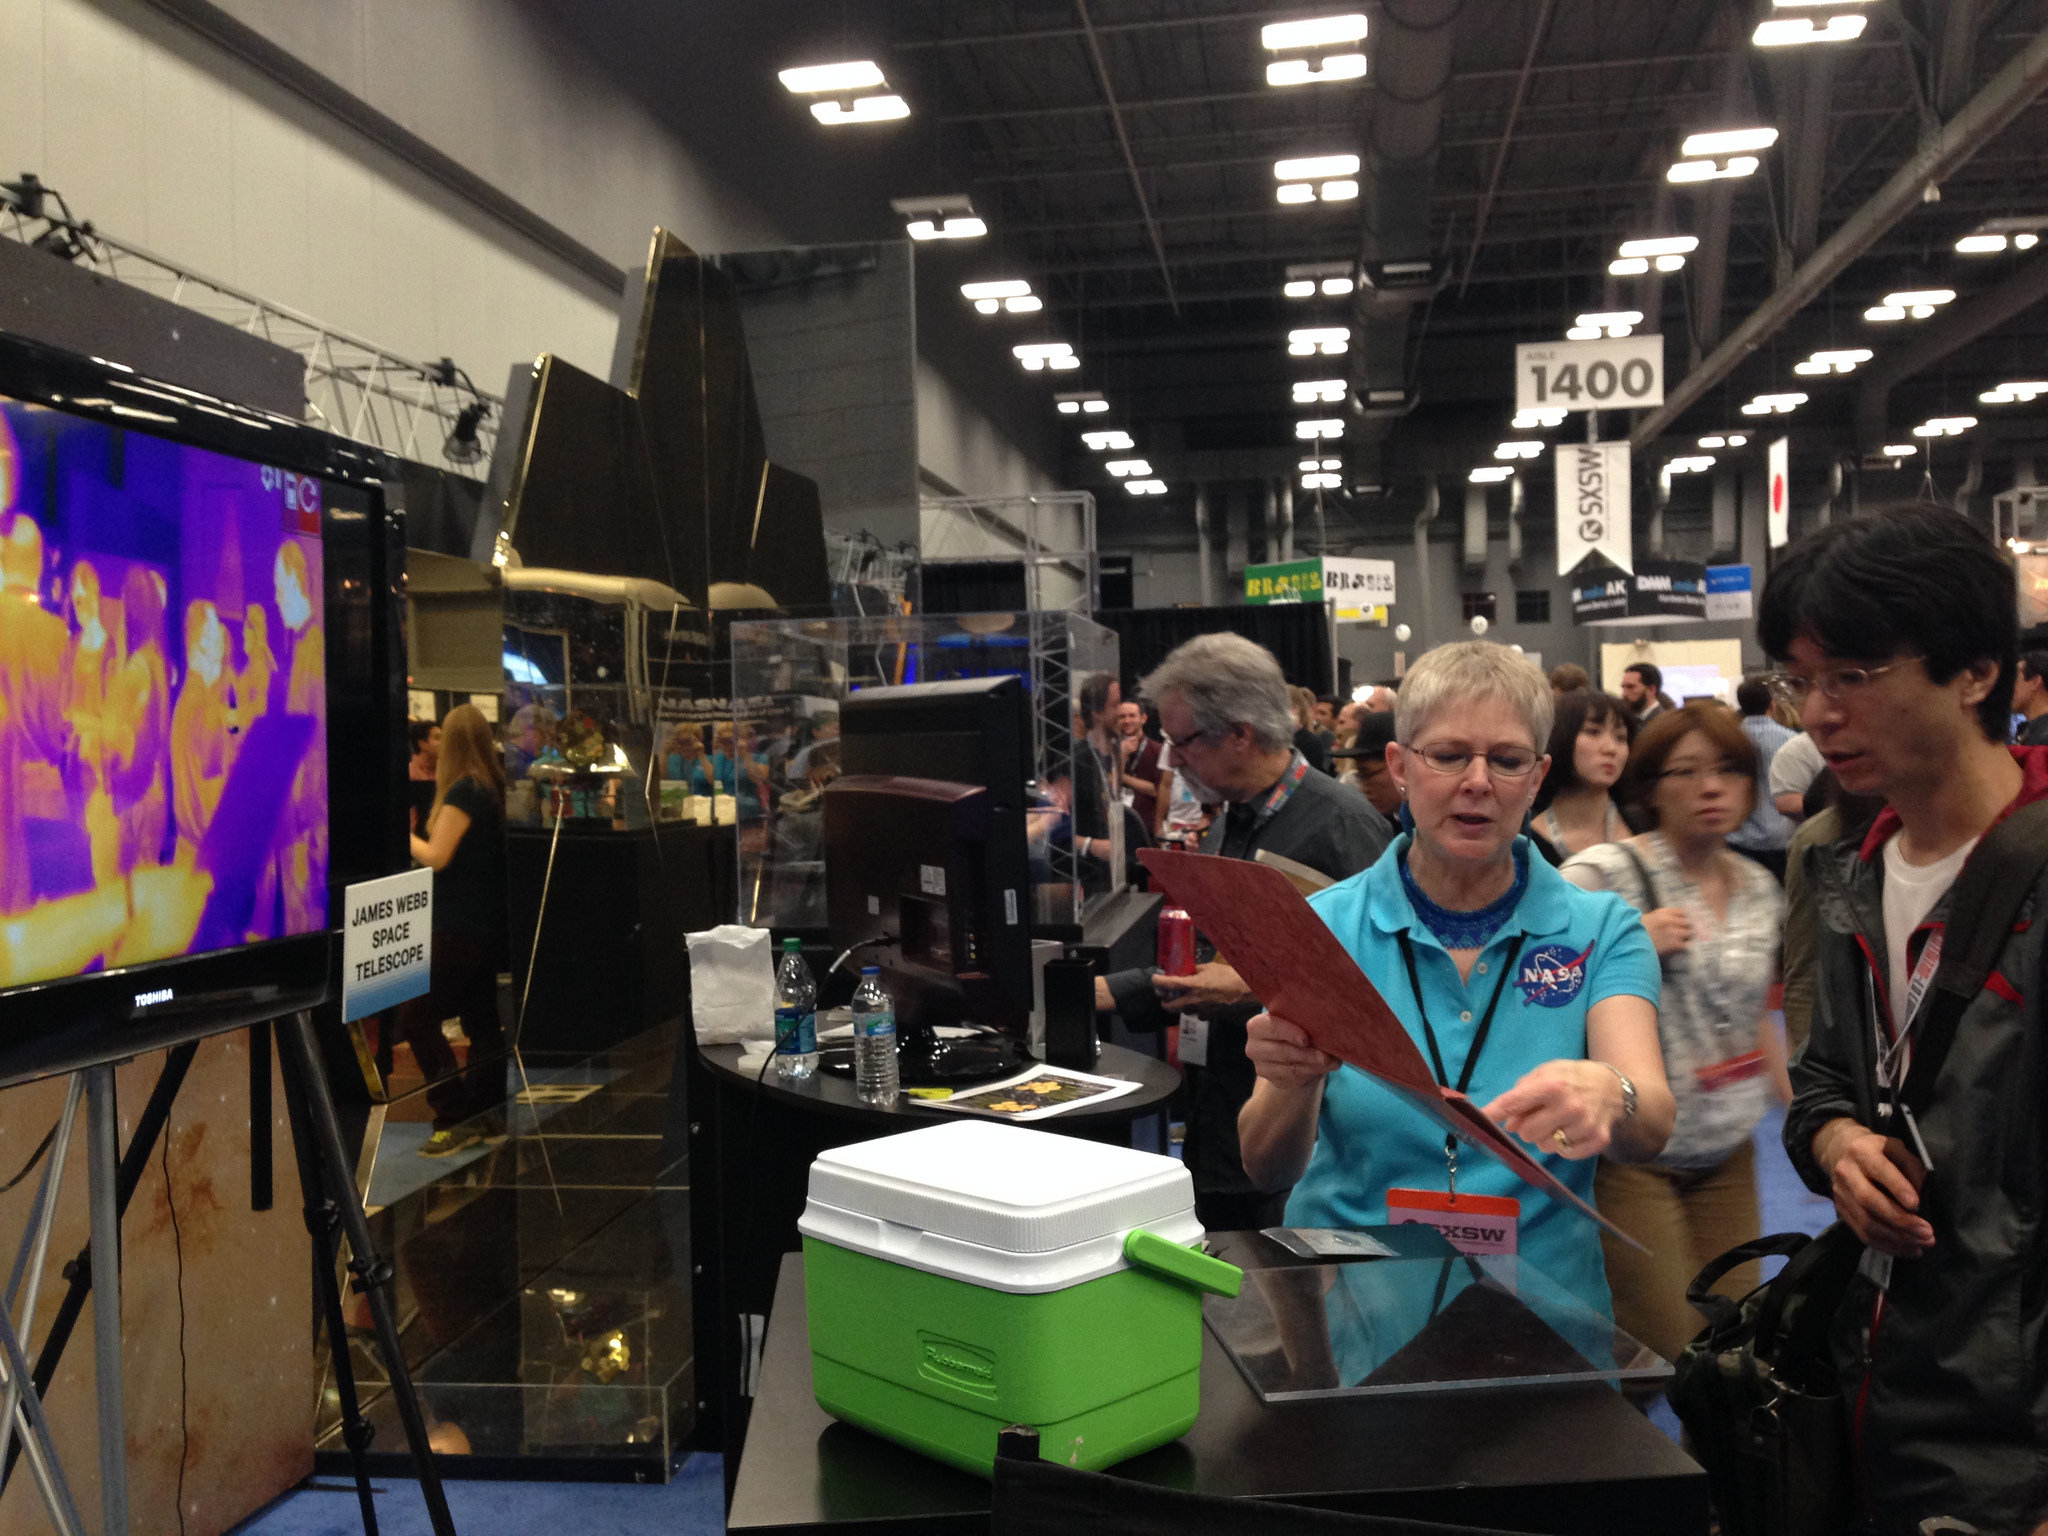 NASA's Colleen Quinn-House explains how the Webb telescope will see in infrared light at the NASA Booth, SXSW 2015.   